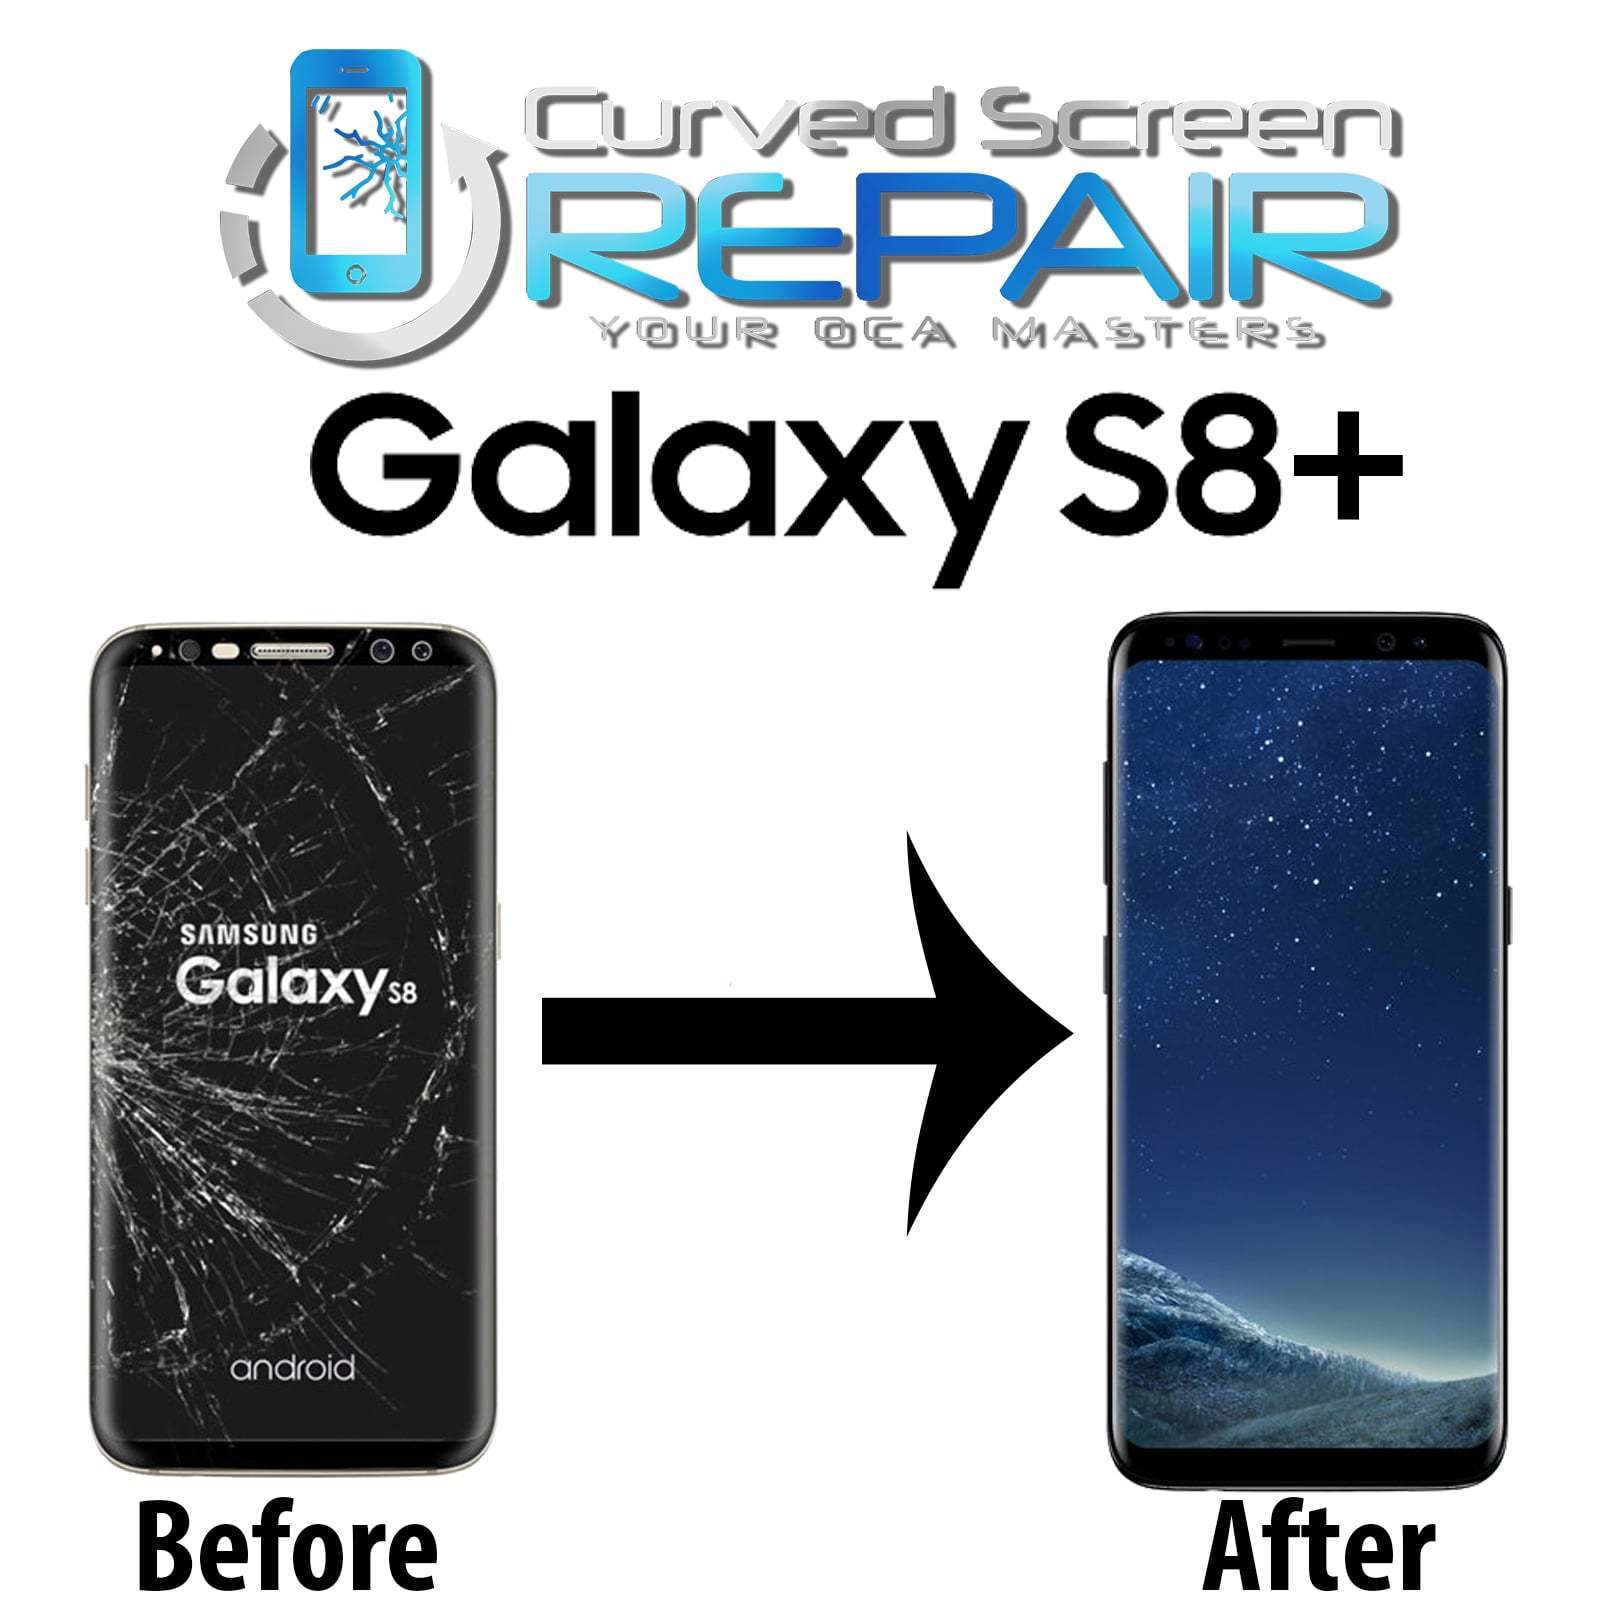 Samsung Galaxy S8+ Plus Cracked Screen Repair Glass Replacement Mail In Service  Samsung Does Not Apply